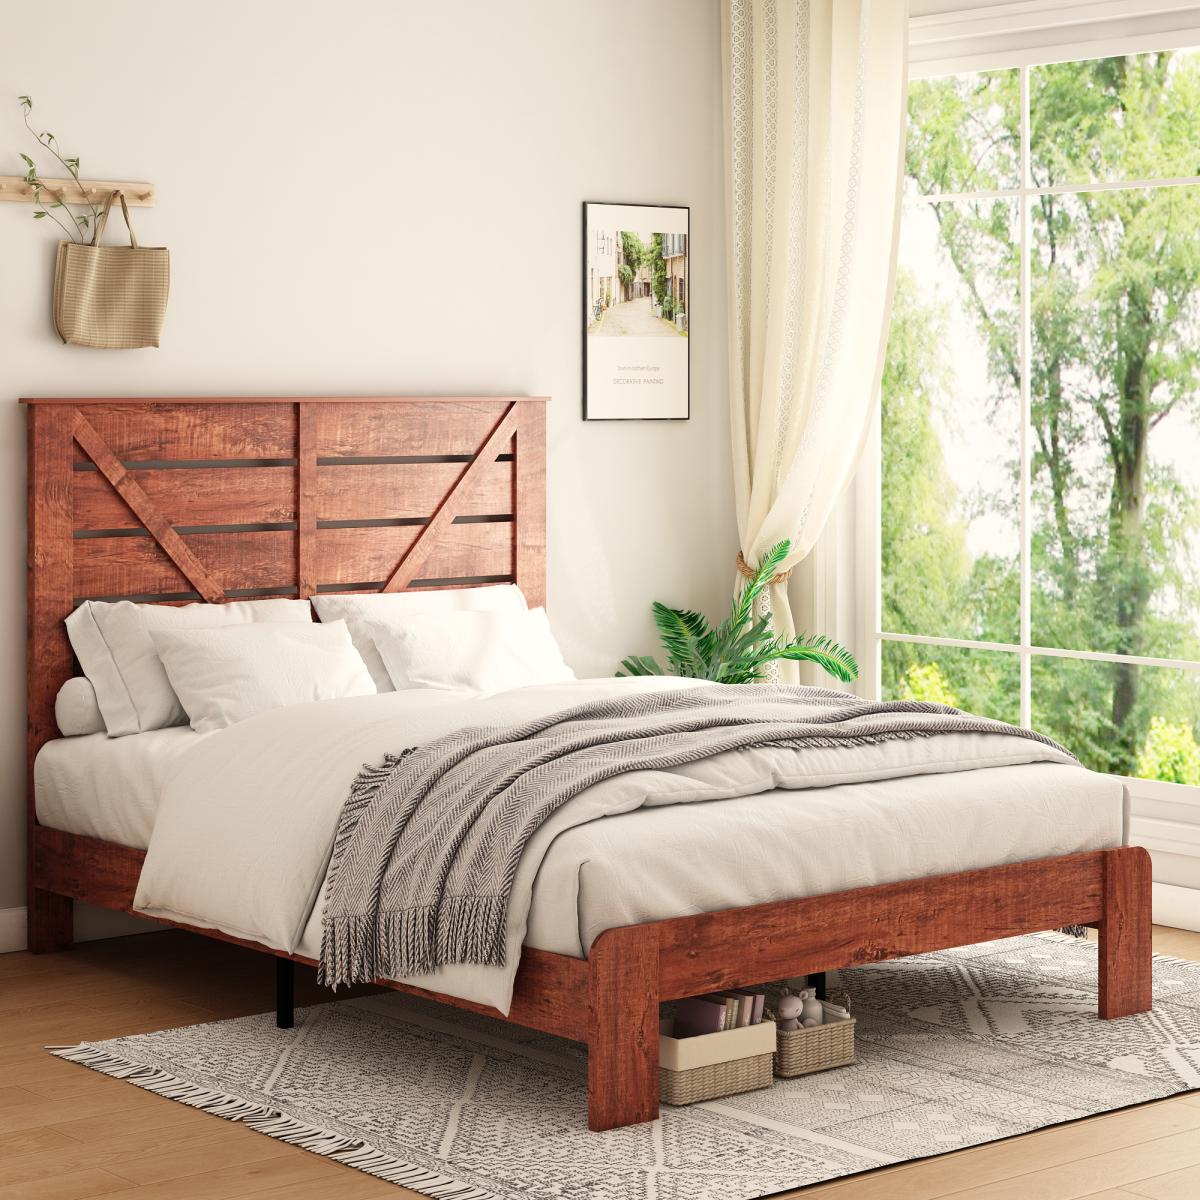 Queen Bed Frame Headboard , Wood Platform Bed Frame , Noise Free,No Box Spring Needed and Easy Assembly Tool,Large Under Bed Storage, Vintage Brown